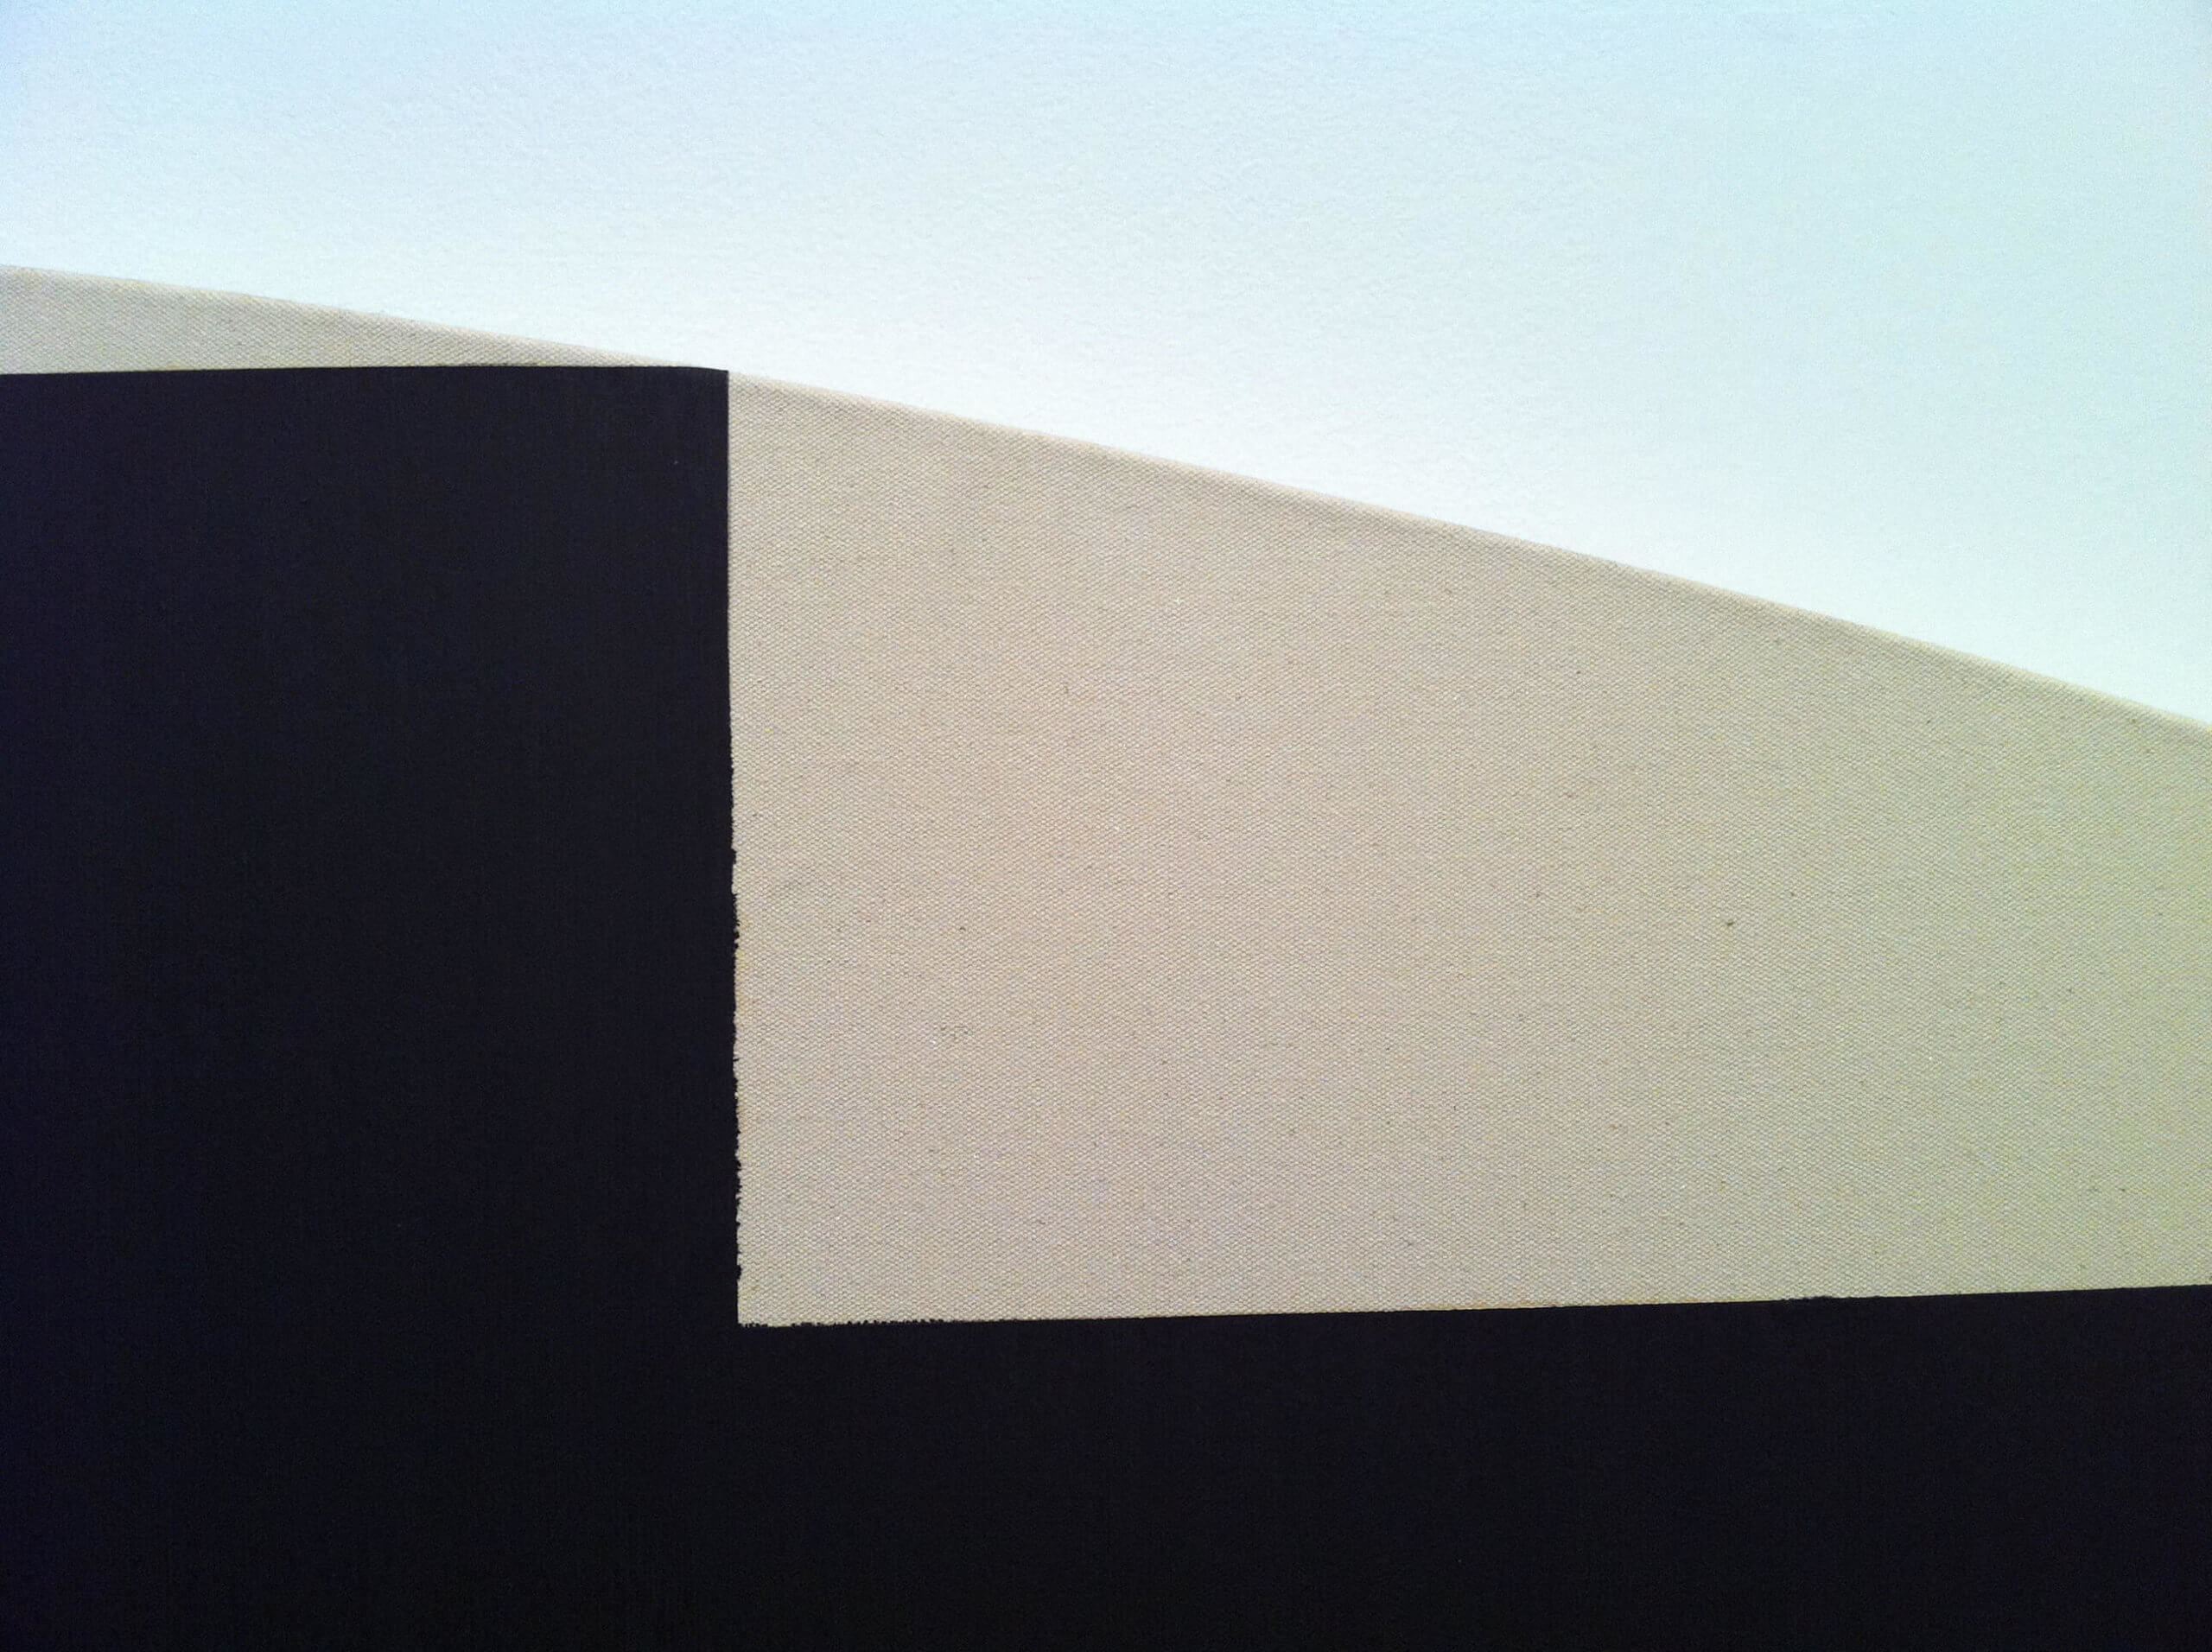 (detail) Ted Stamm, ZYR-4, 1979, oil on canvas (courtesy Minus Space & Estate of Ted Stamm)